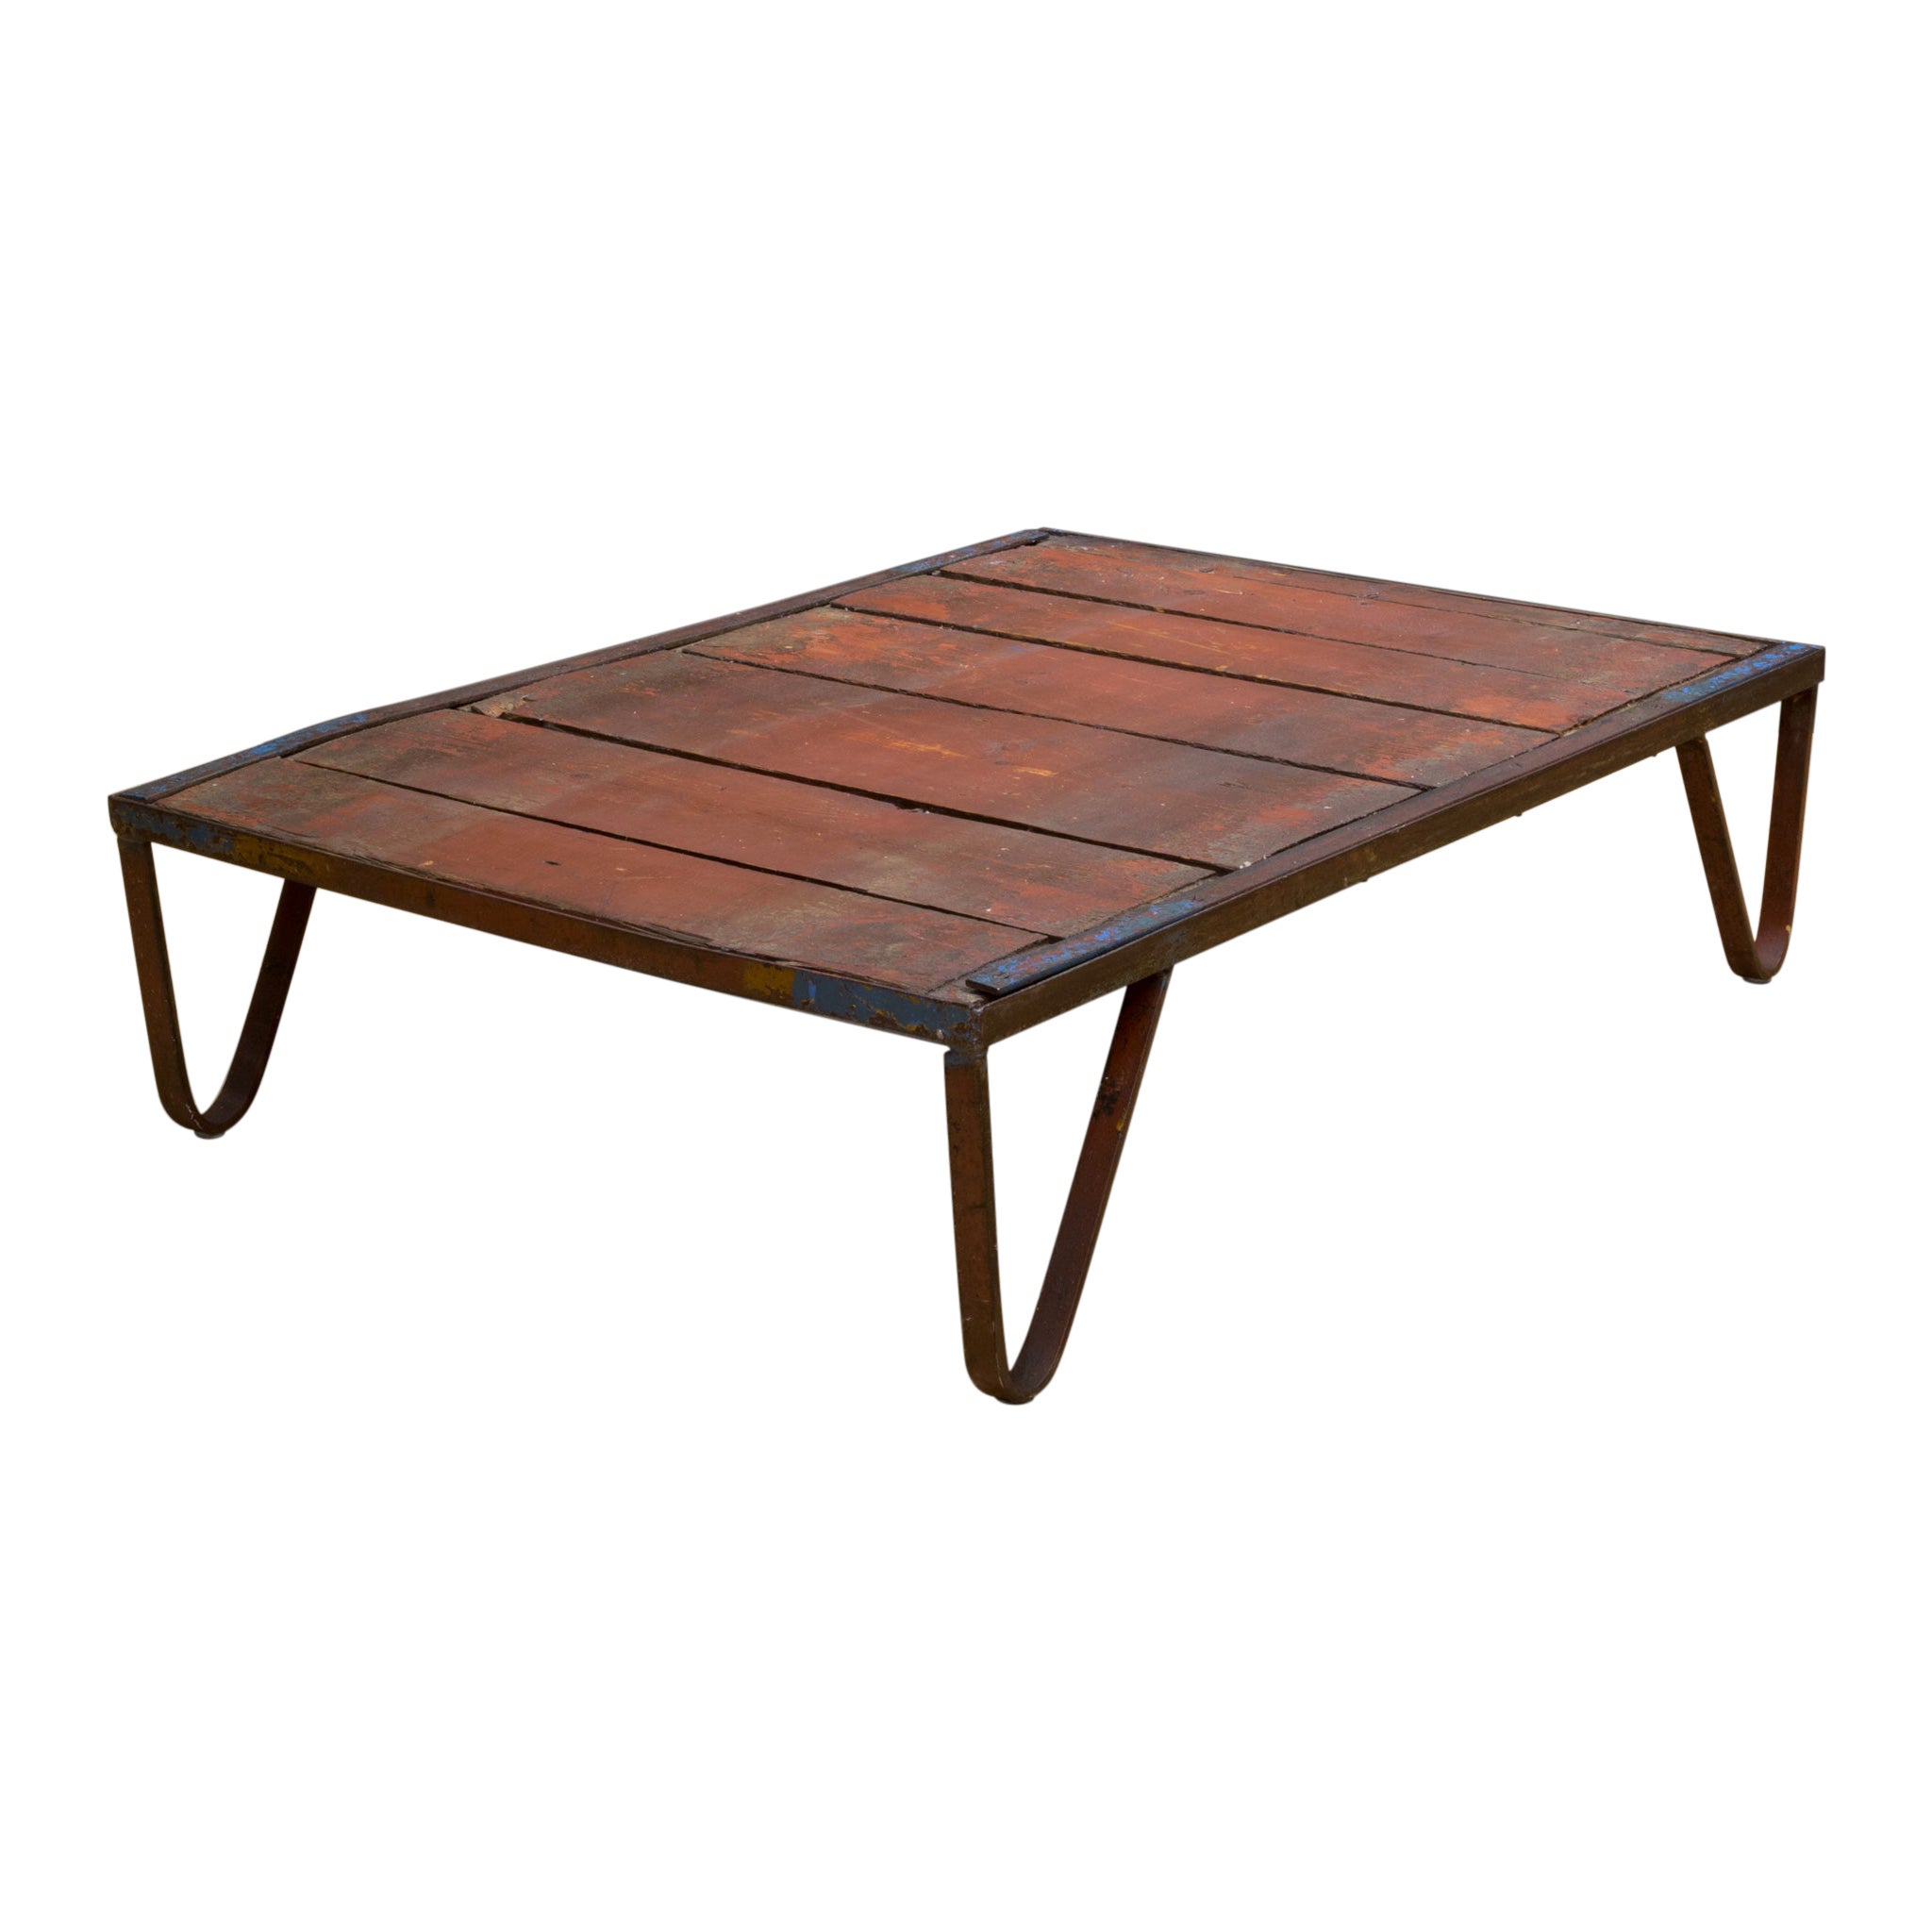 Early 20th c. Dutch Pallet Coffee Table, c.1940 For Sale